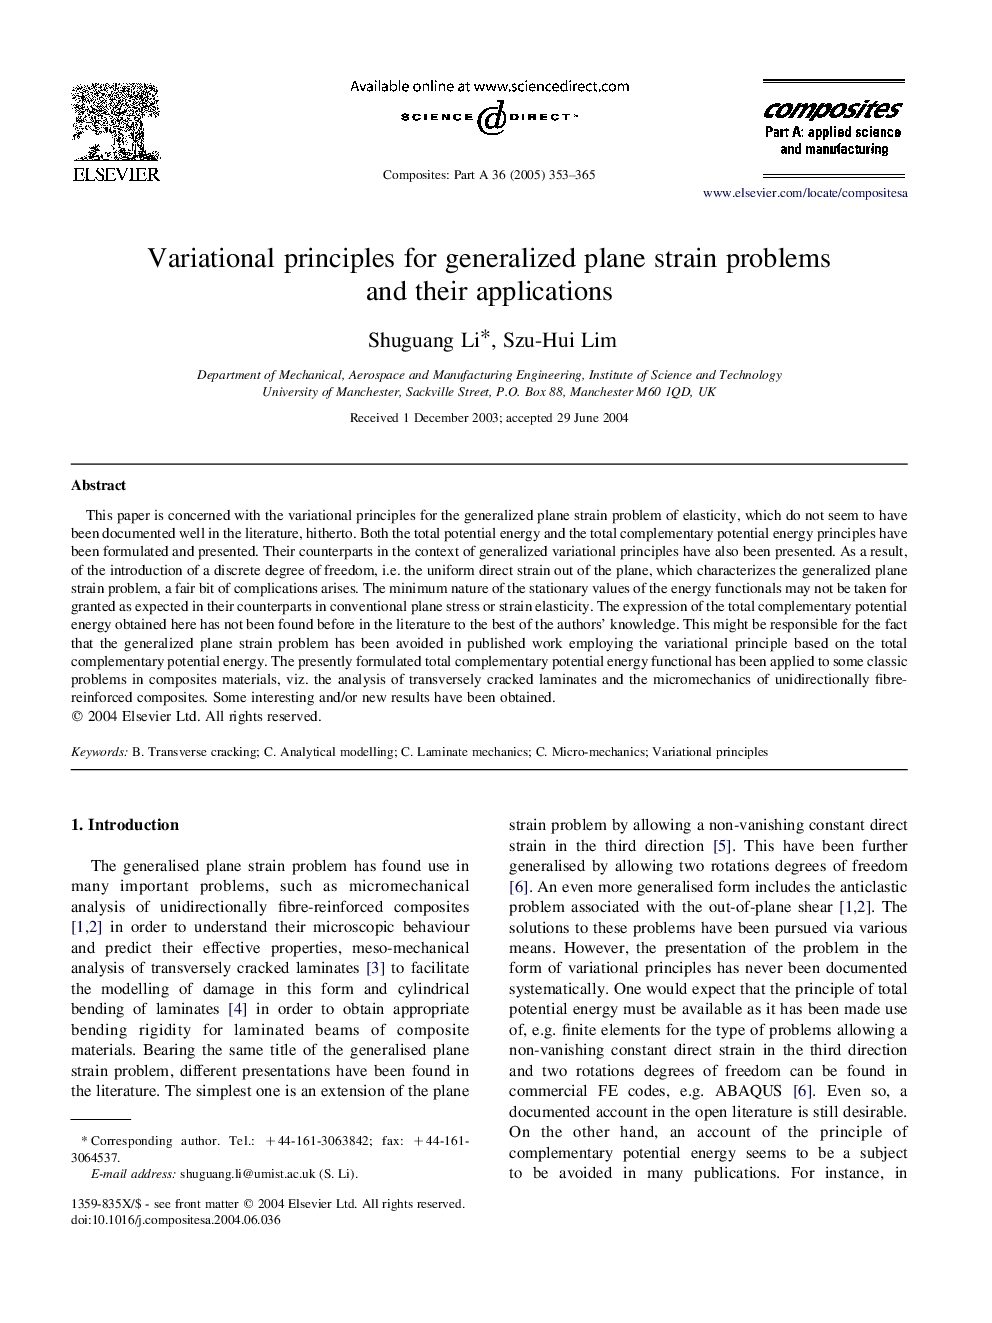 Variational principles for generalized plane strain problems and their applications